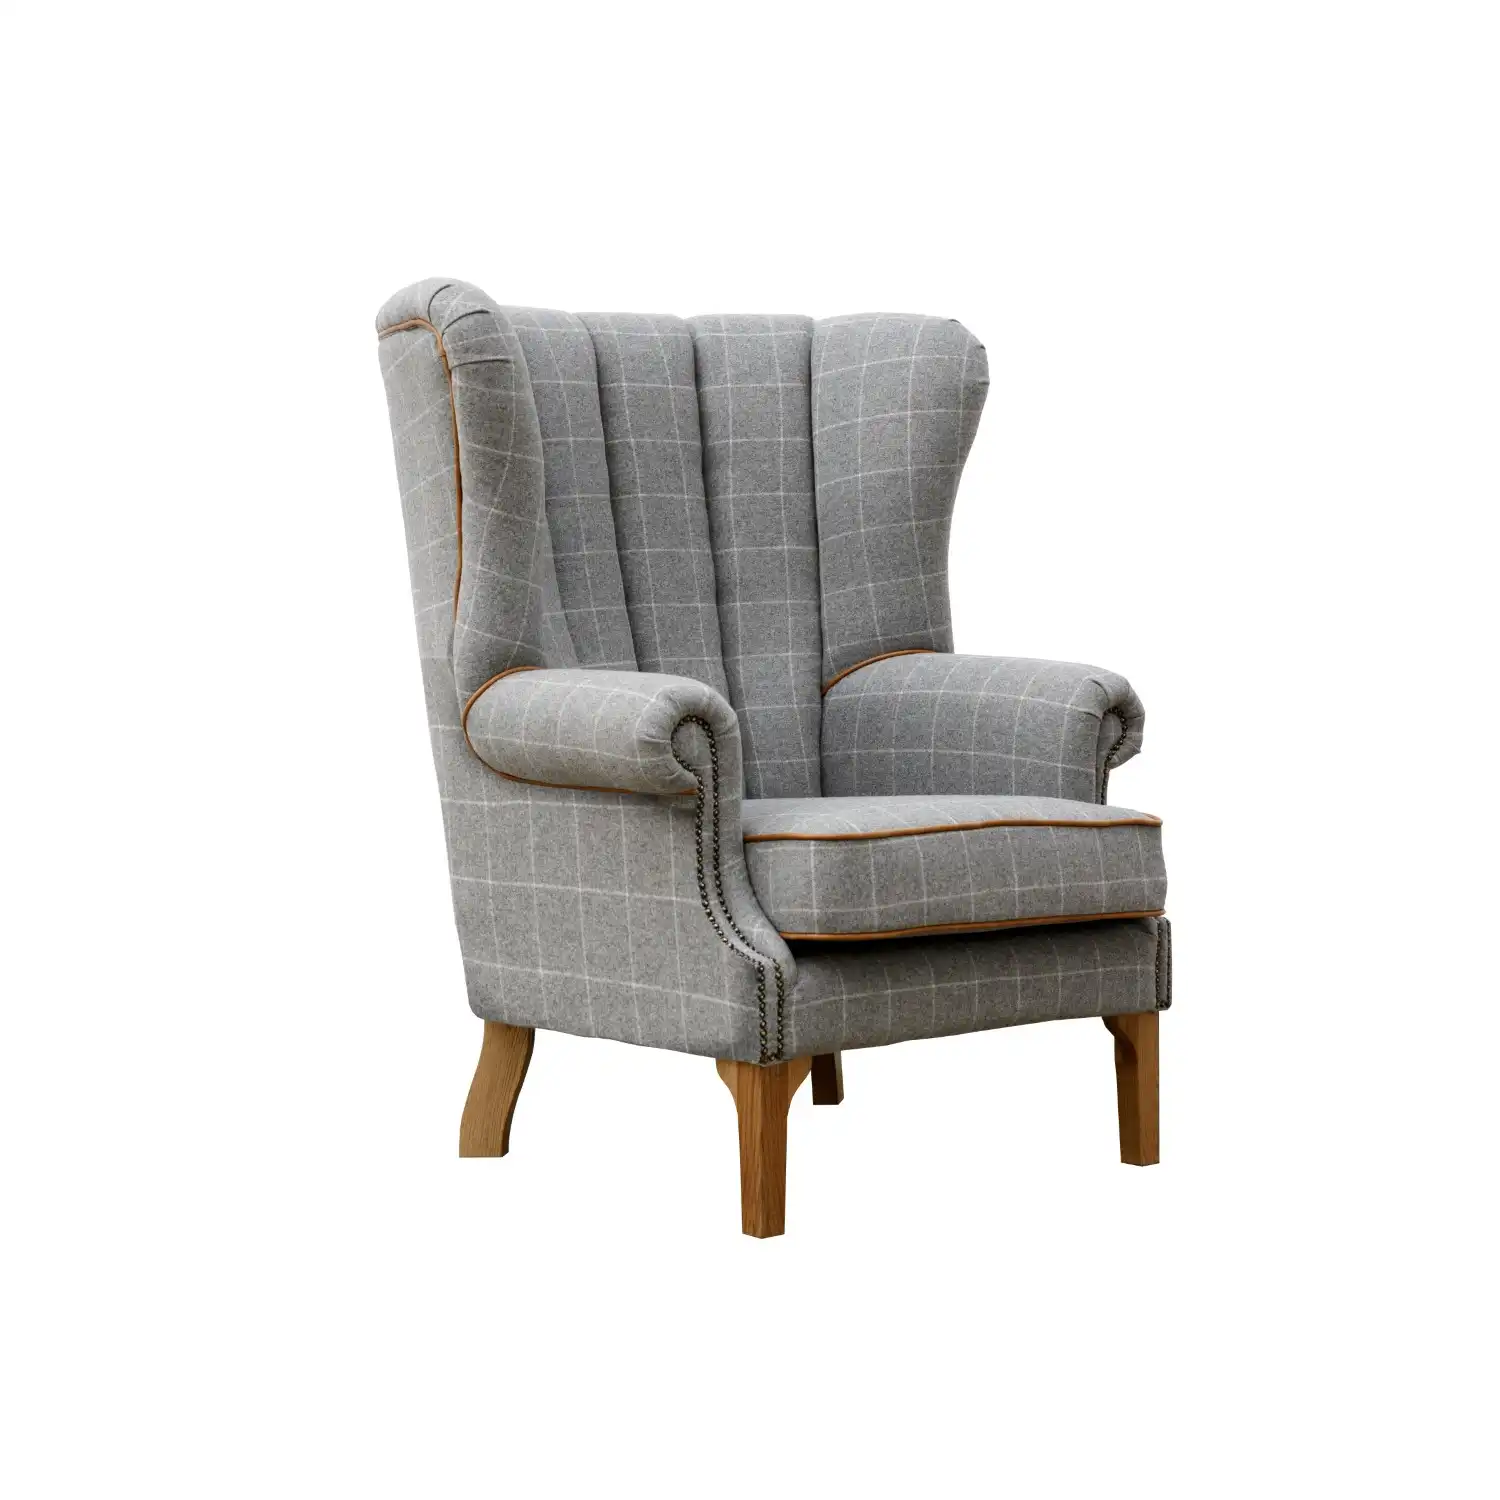 Grey and Tan Fluted Wing Back Chair